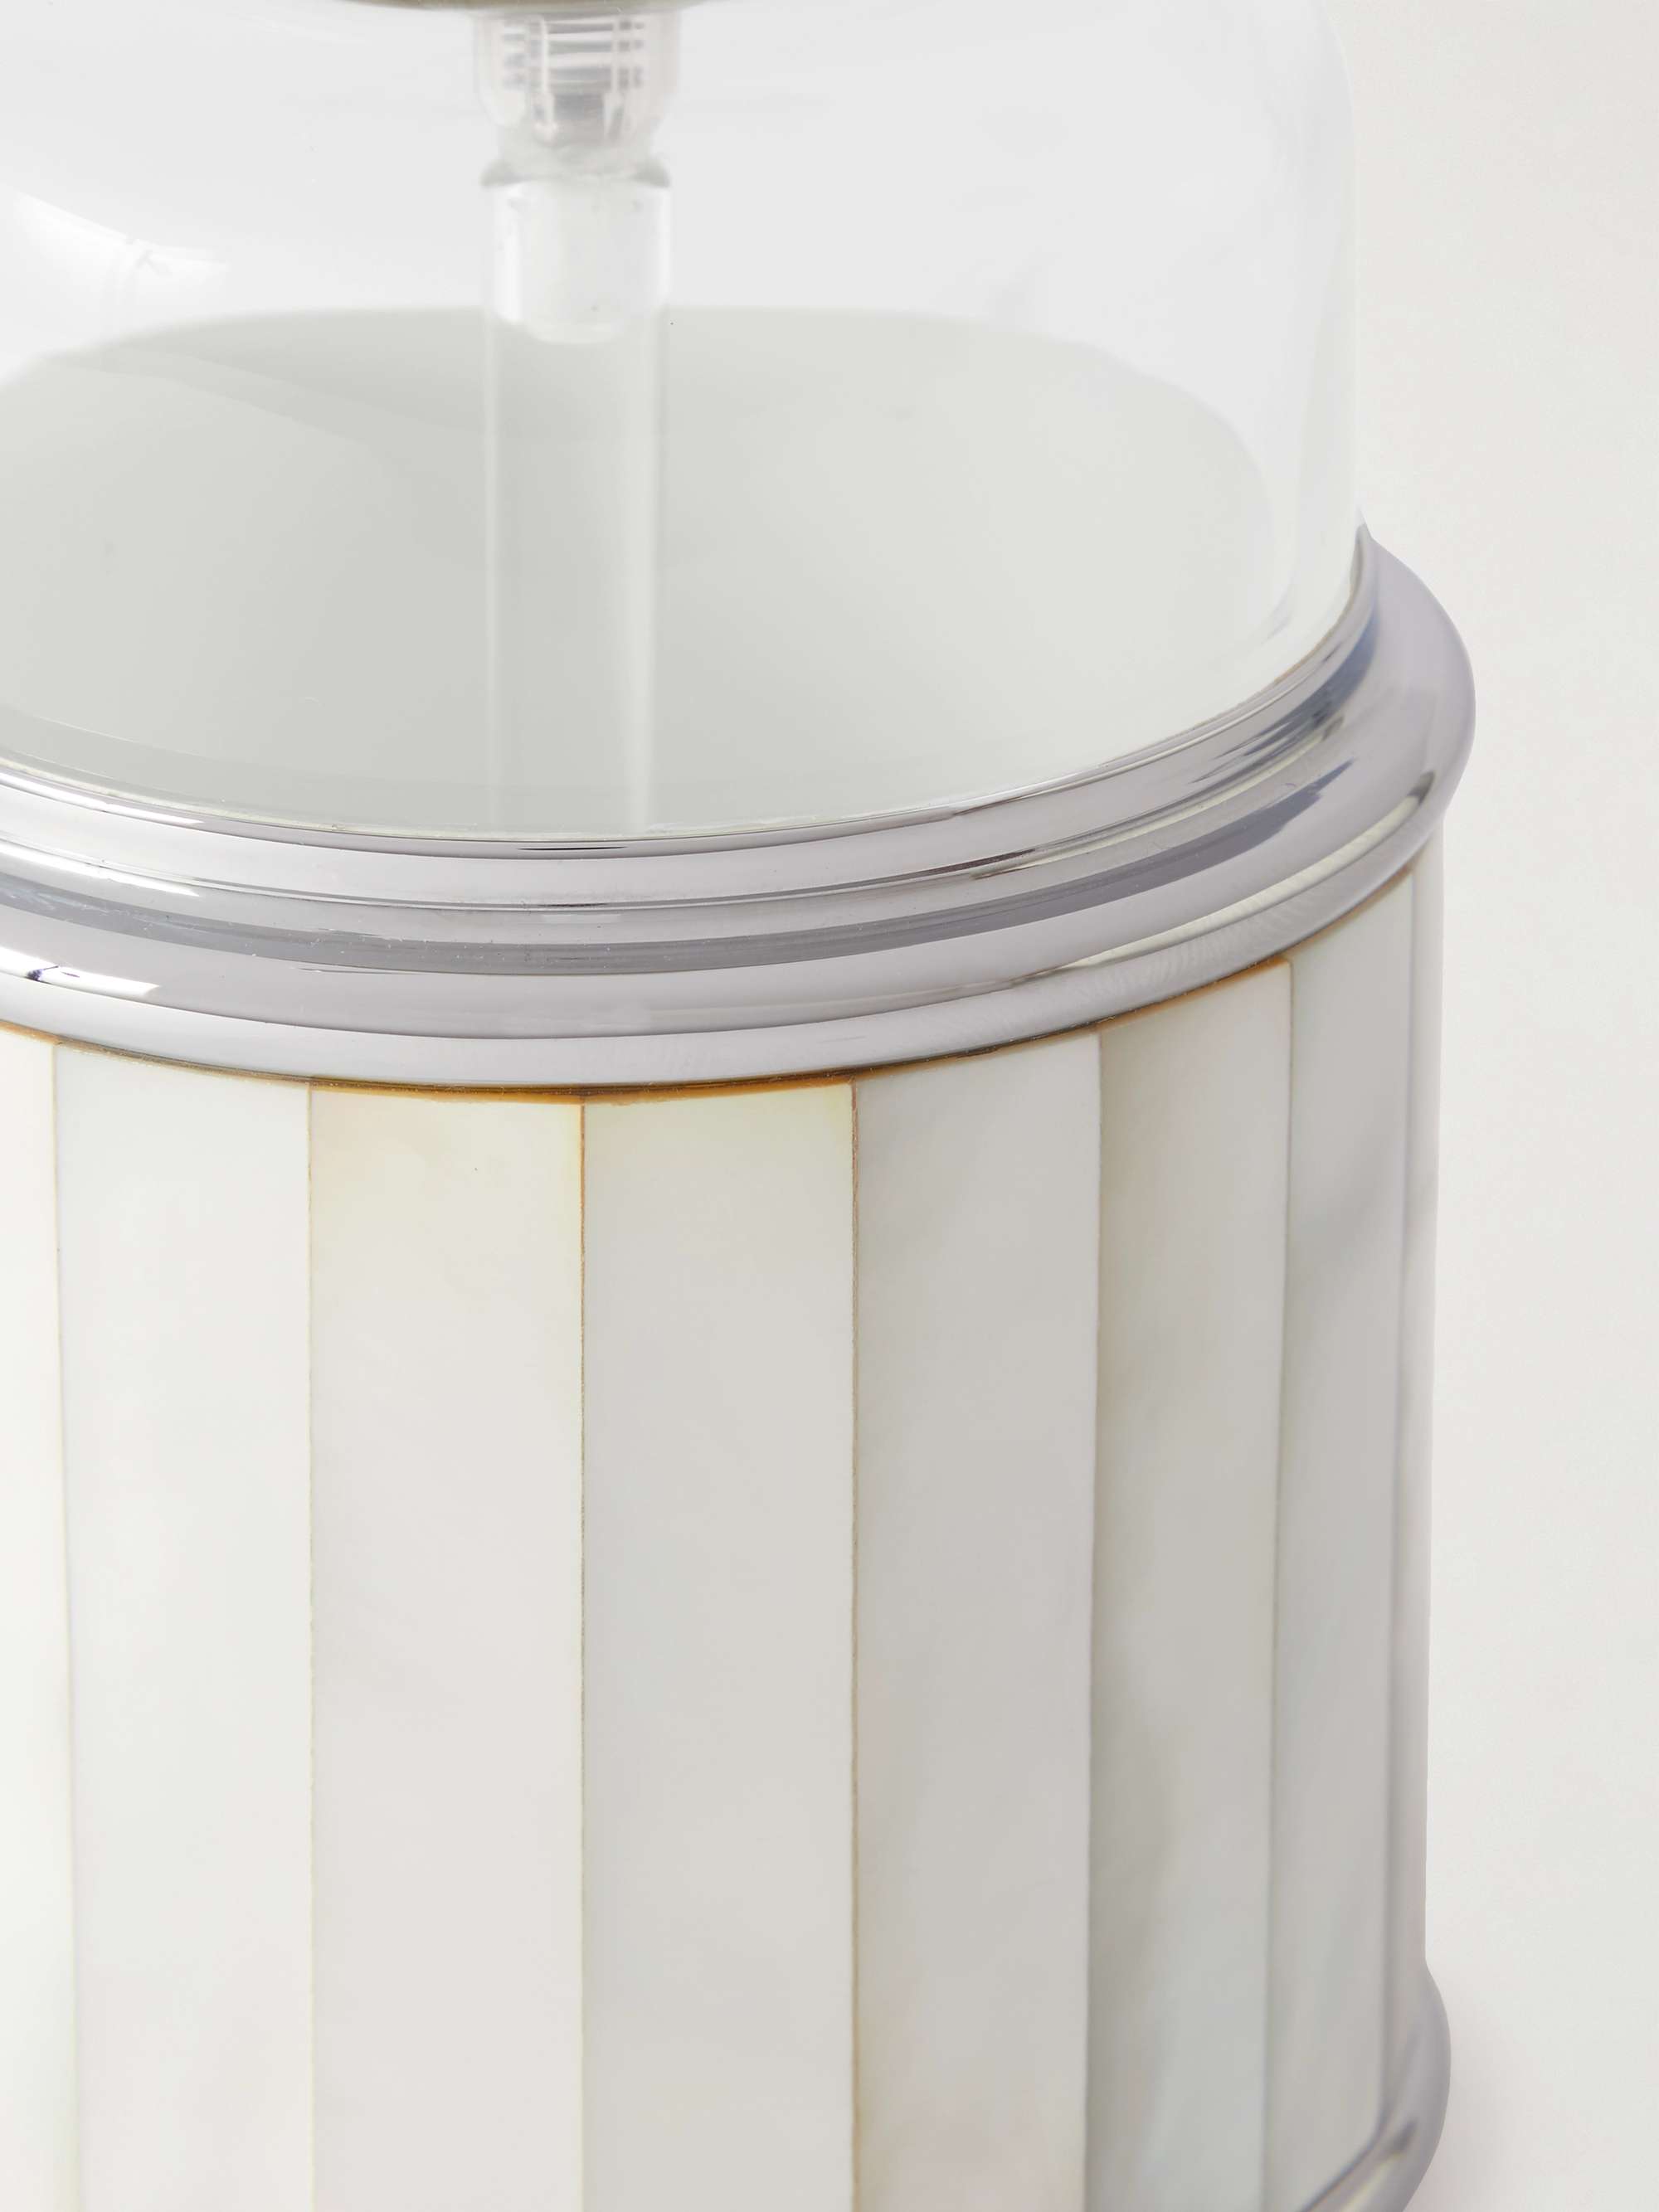 LORENZI MILANO Glass, Mother-of-Pearl And Chrome-Plated Soap Dispenser